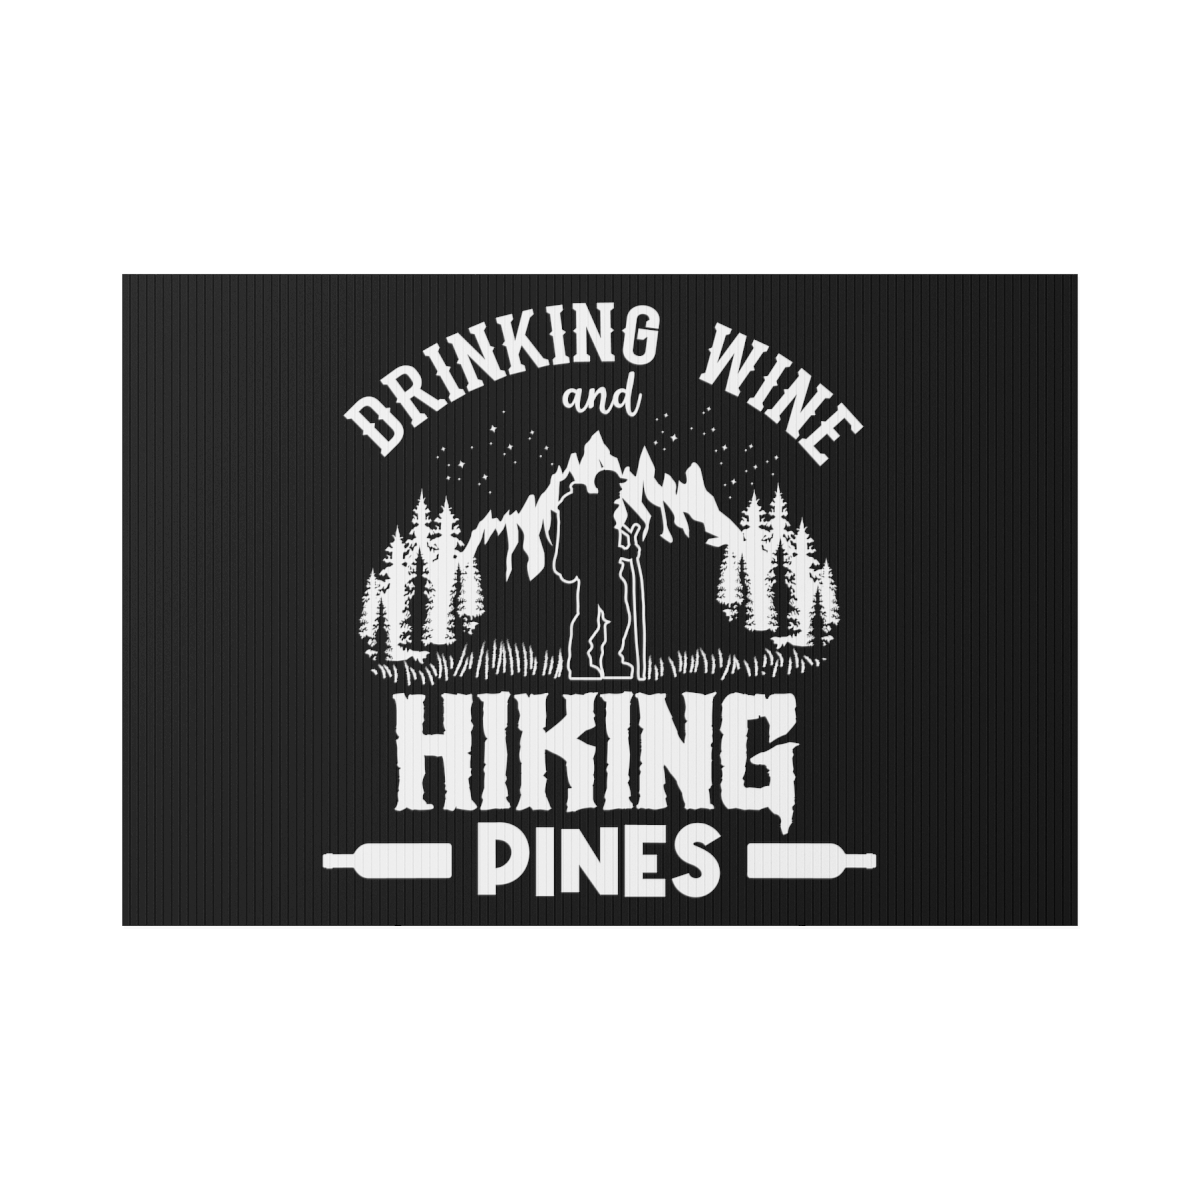 Primary image for Personalised Lawn Sign - Mountain Drinking Wine Hiking Dines - 22"x15"